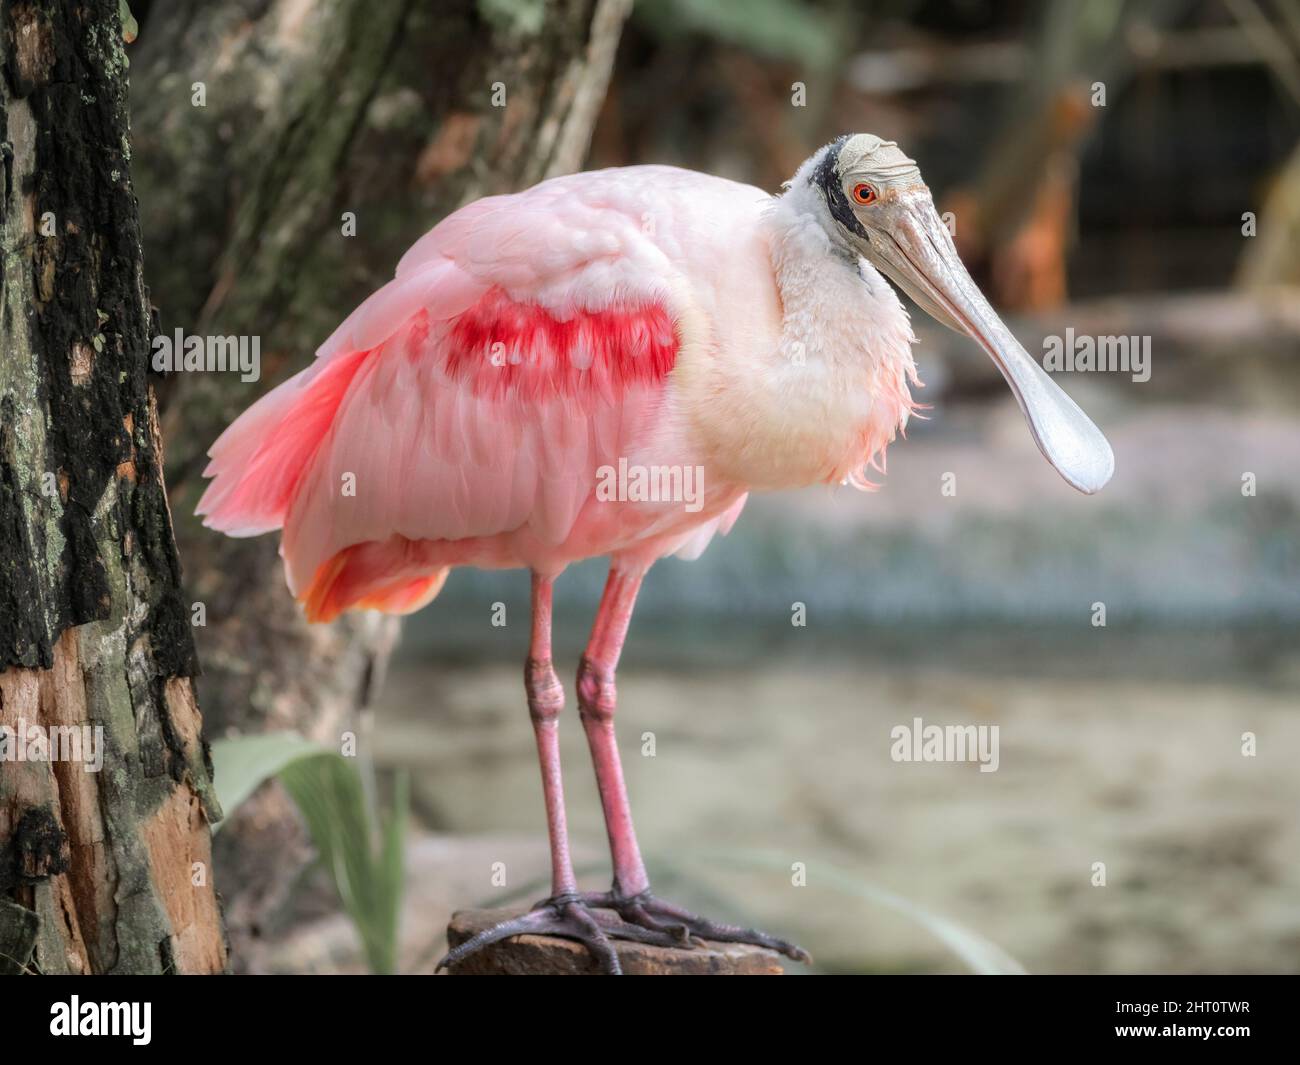 Closeup View of Roseate Spoonbills Standing on Tree Stump in a Pond. Stock Photo